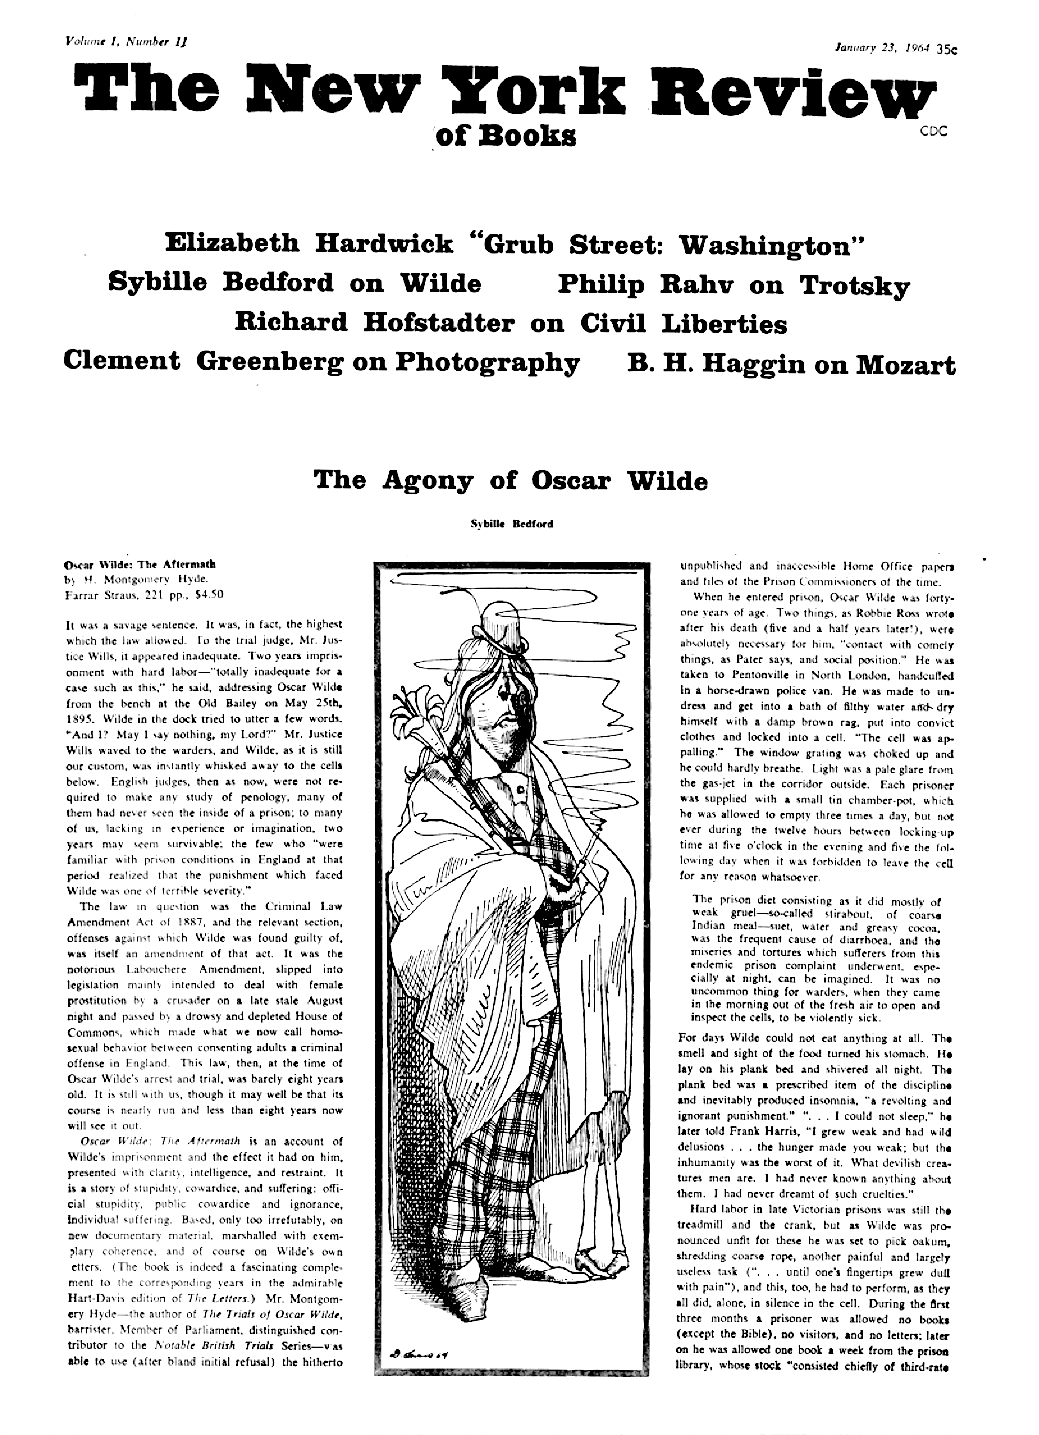 Image of the January 23, 1964 issue cover.